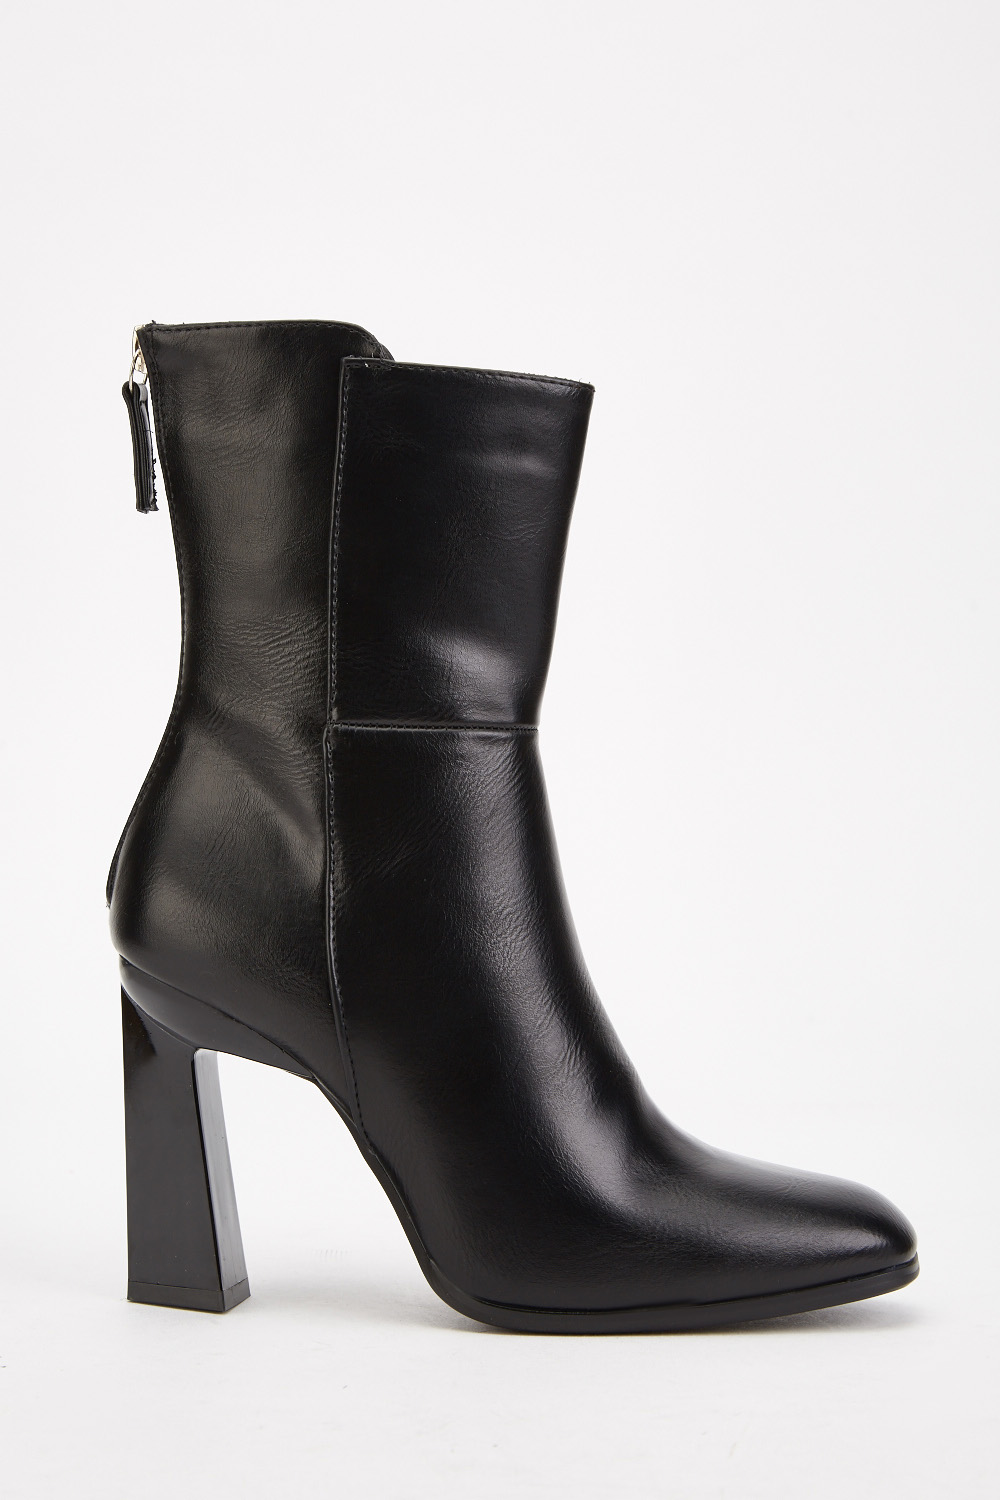 Faux Leather Black Heeled Boots - Just $7